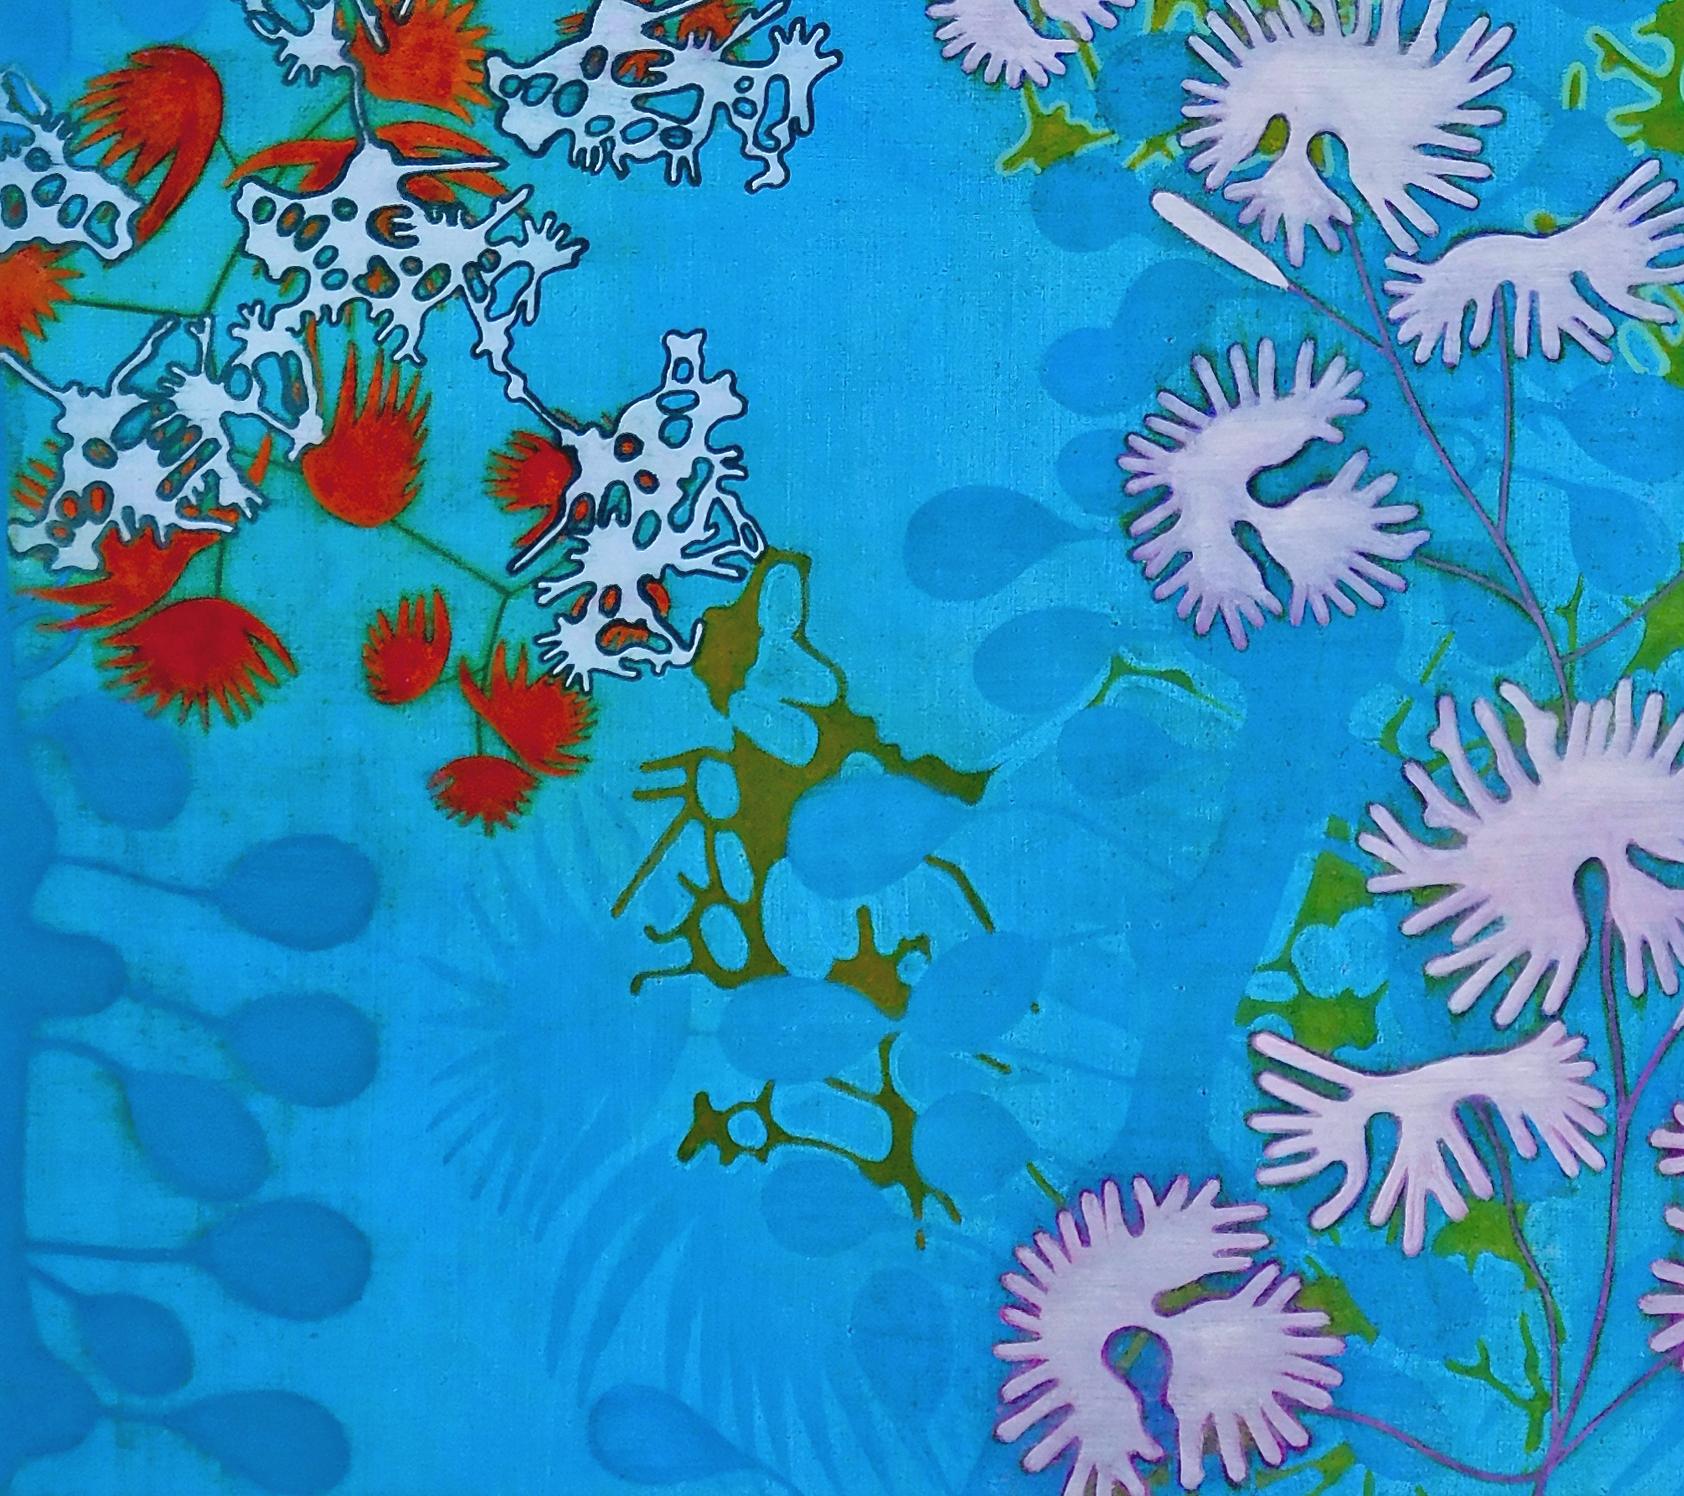 #21-13 - Abstract Floral Painting / Blue Nature Painting - Brown Abstract Painting by Annette Davidek